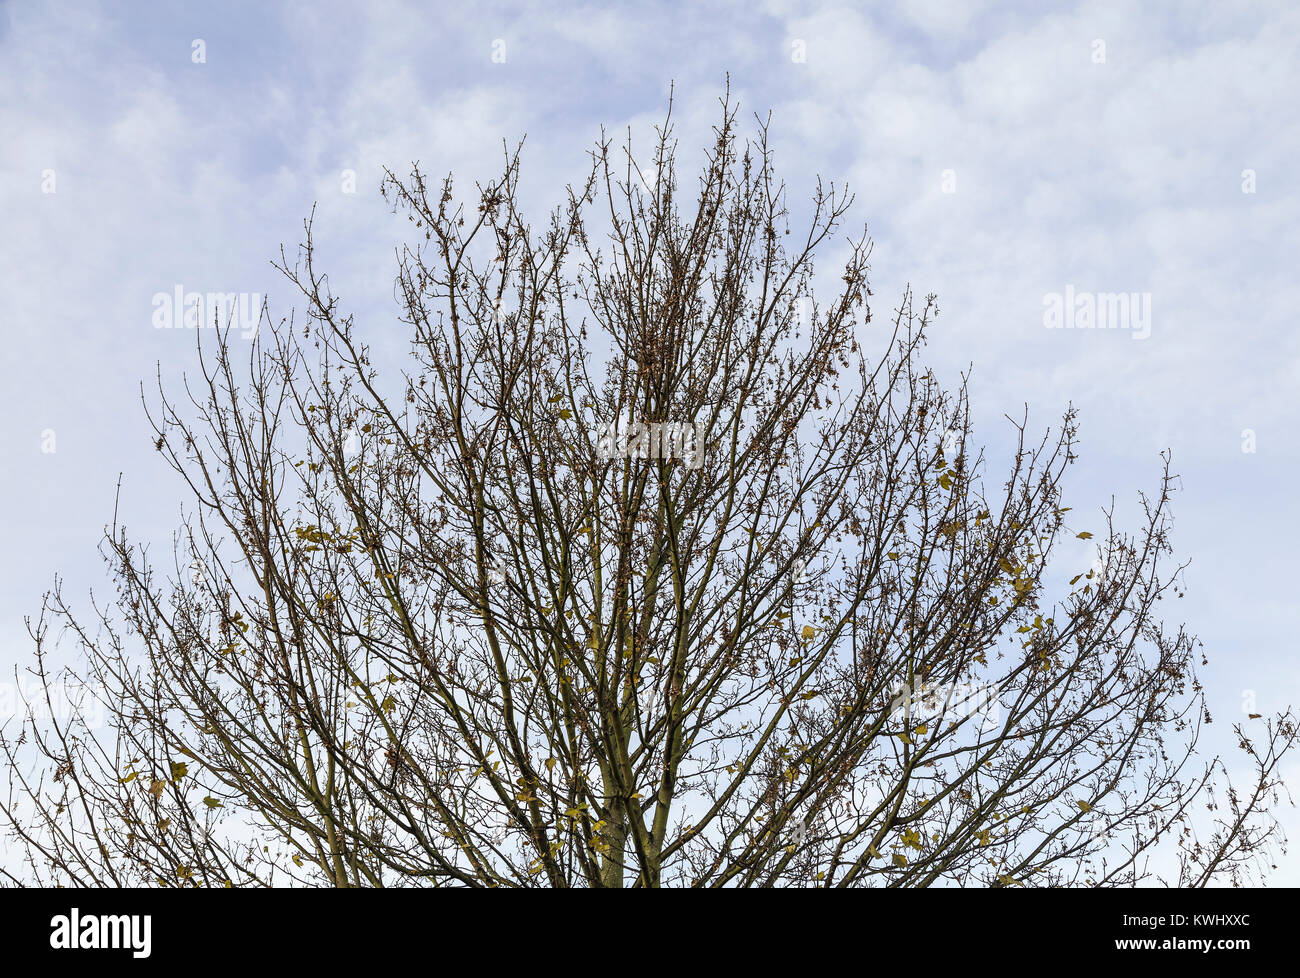 An image of the last few autumn leaves desperately clinging to a Sycamore tree. Stock Photo